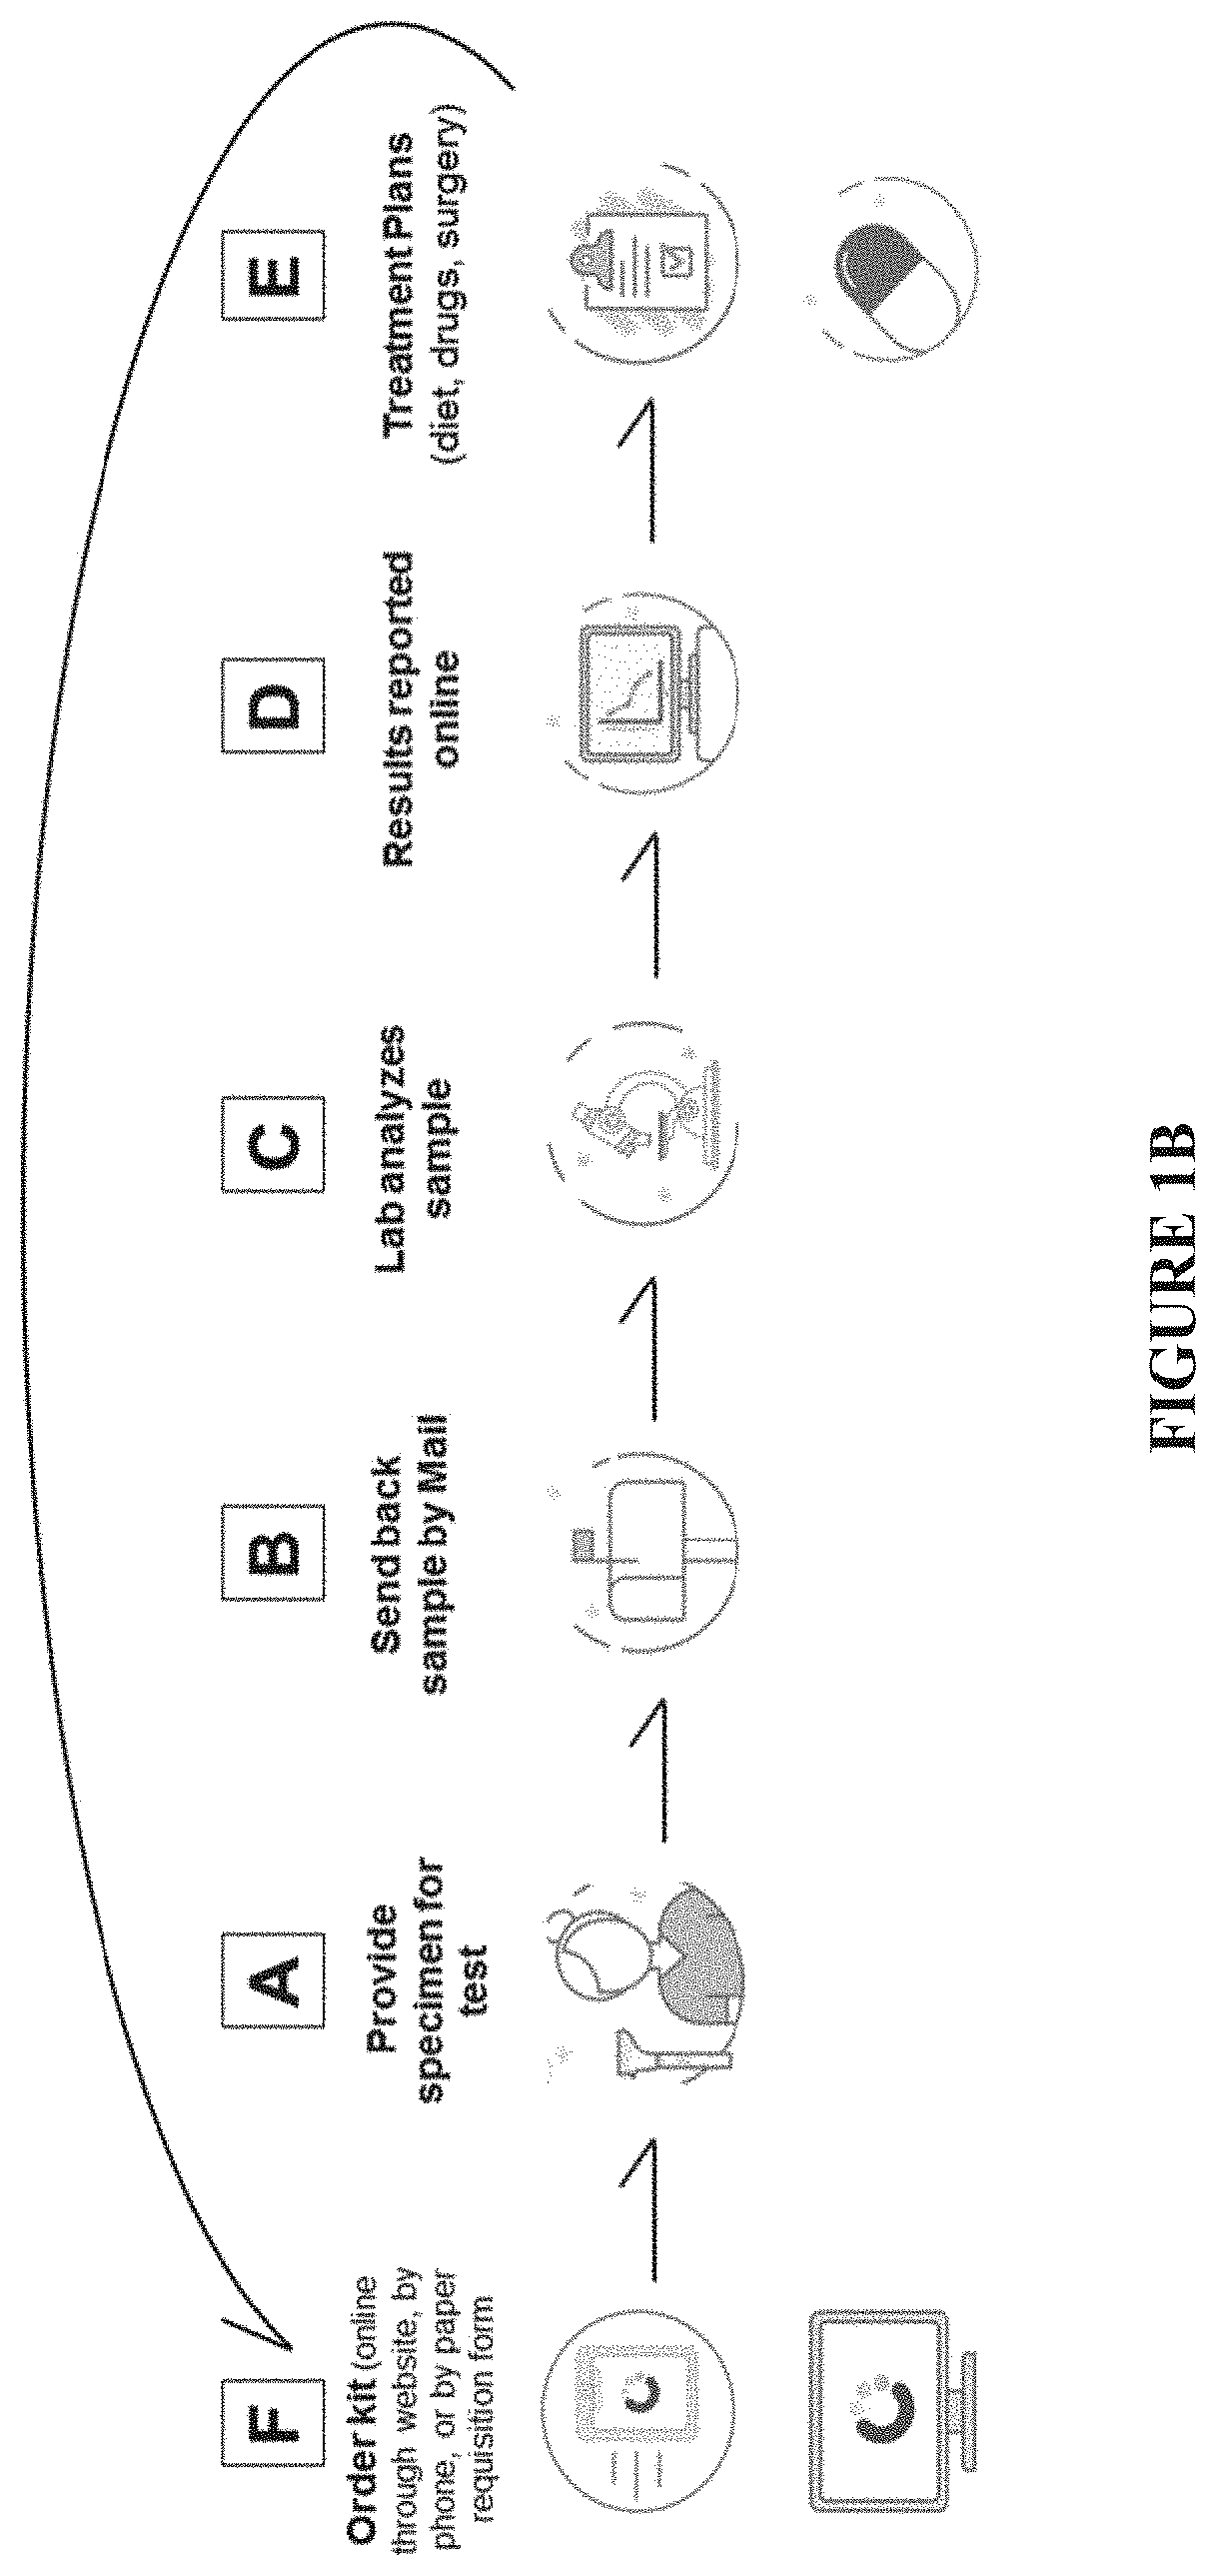 Methods and compositions for detecting and treating endometriosis